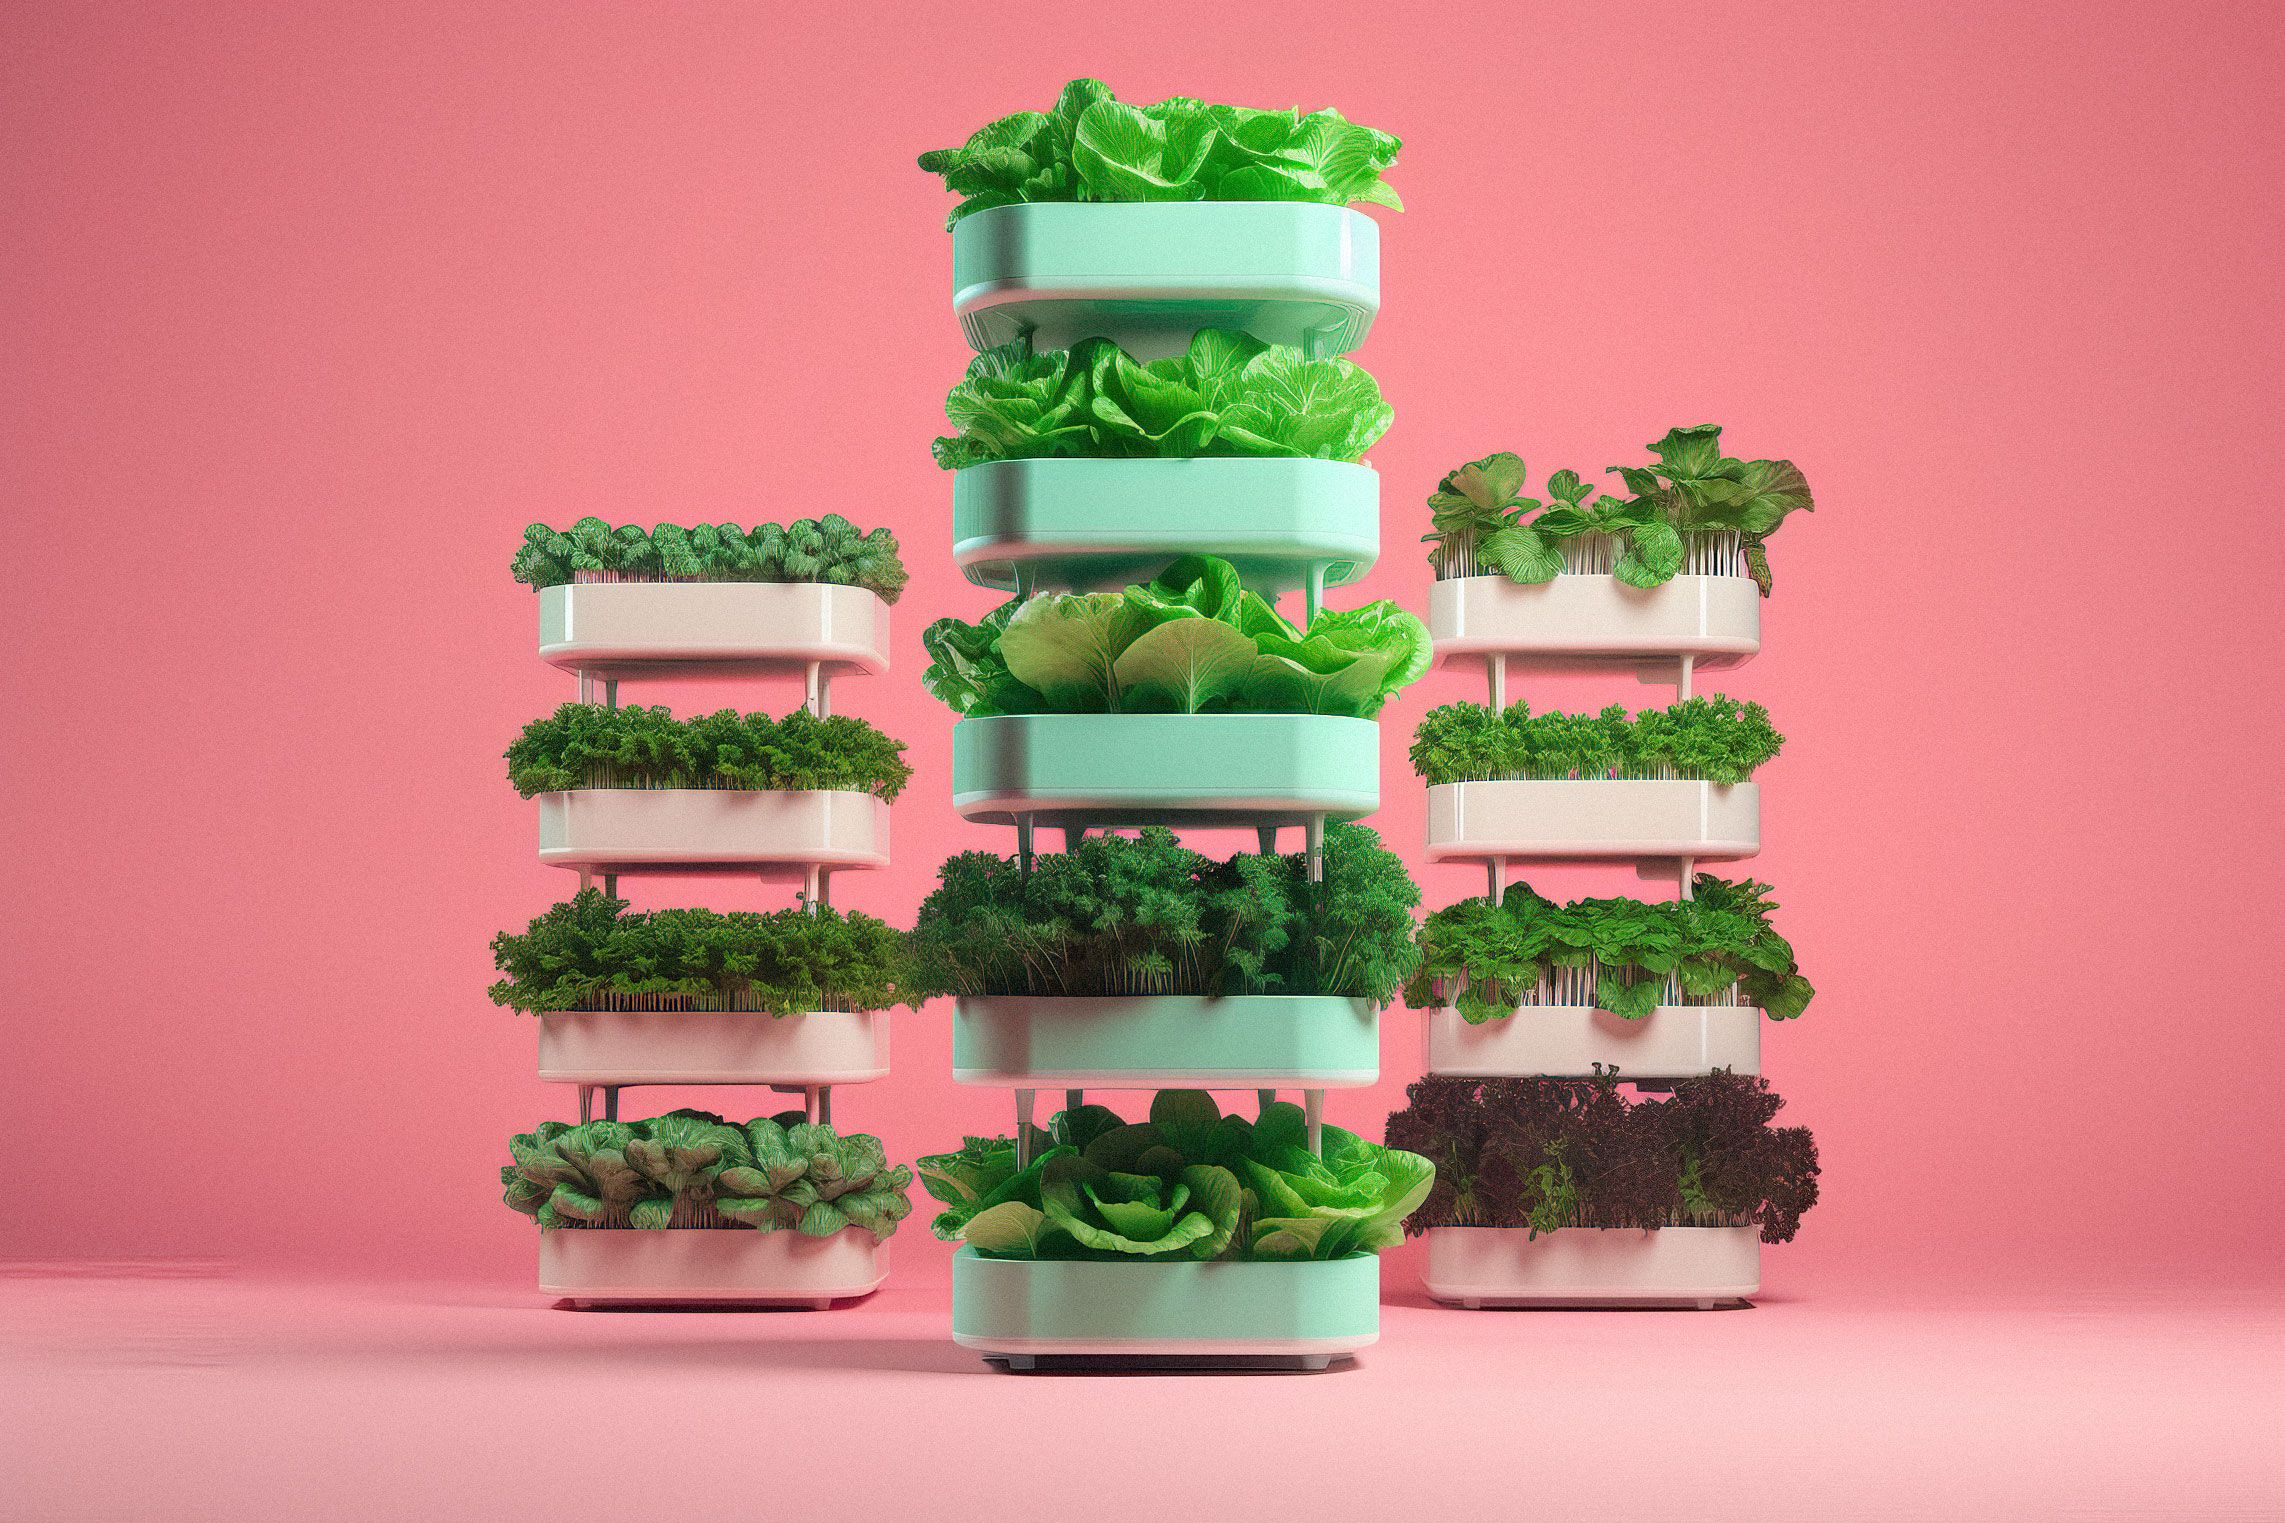 Faster Delivery For Fresher Urban Farming Produce